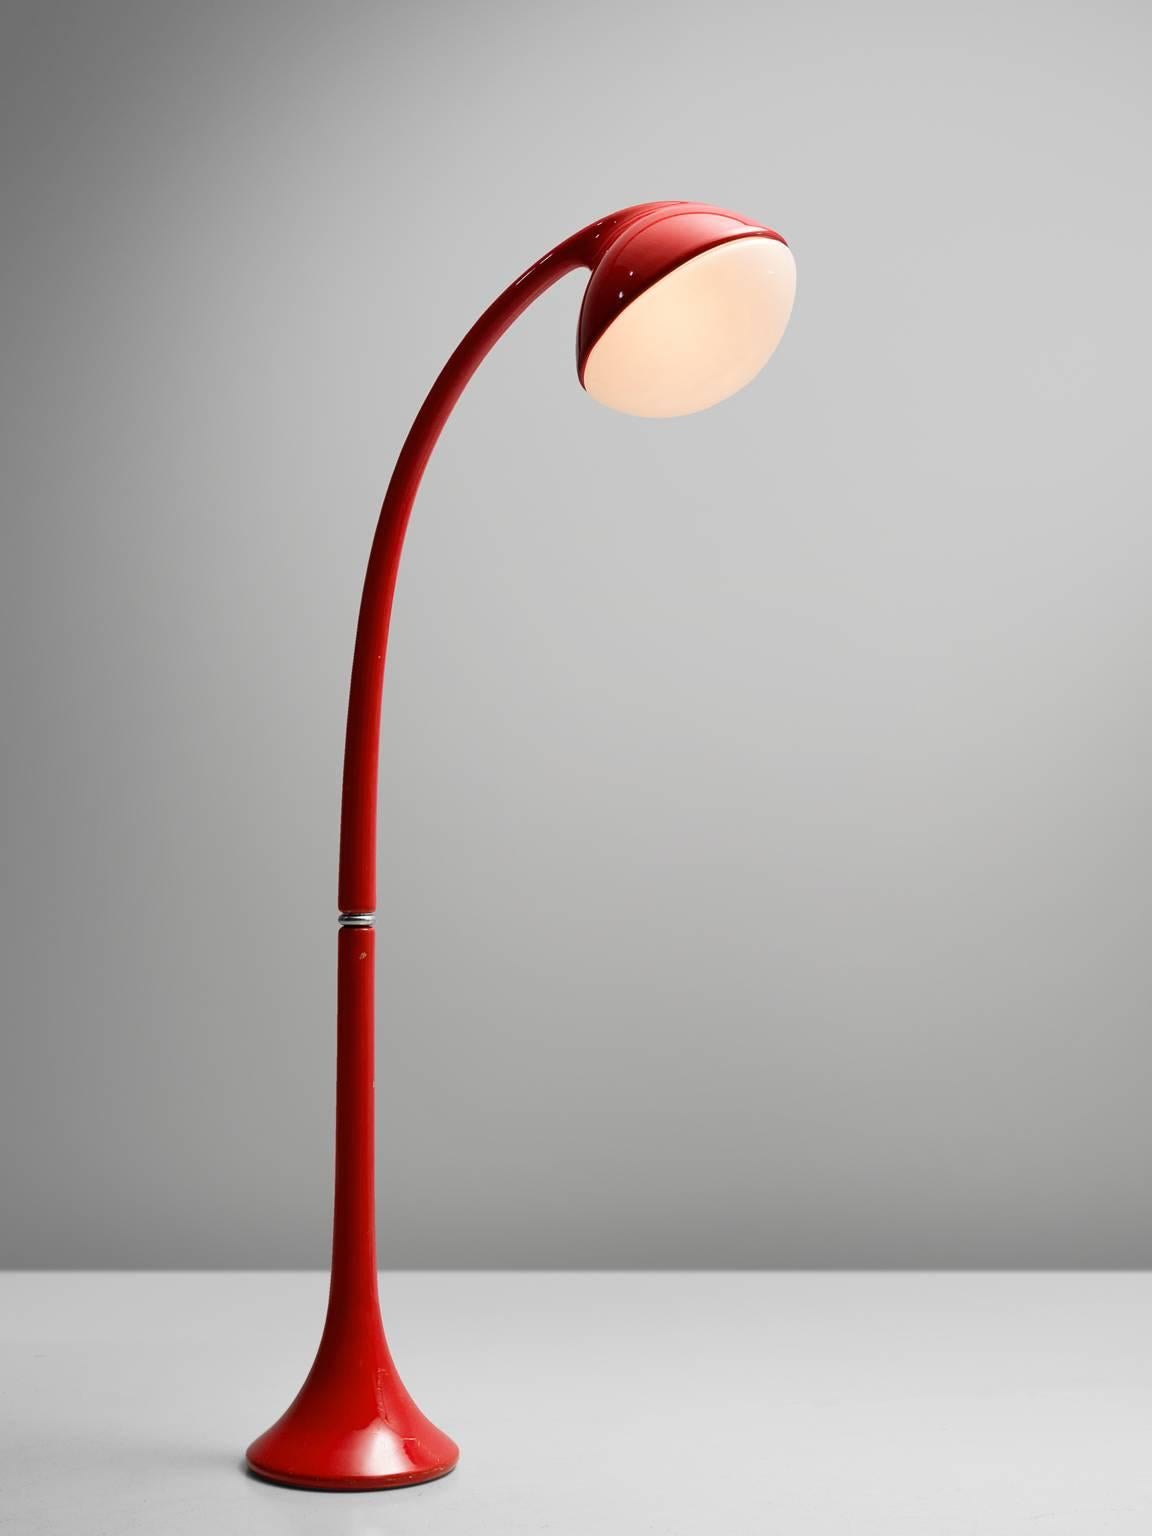 Floor lamp 'Lampione', in steel and Lucite, by Fabio Lenci for Guzzini, Italy, 1971.

A bright red edition of 'Lampione' floor lamp by Fabio Lenci for Guzzini. A sculptural shaped steel frame, coated with polyurethane coating and a frosted Lucite